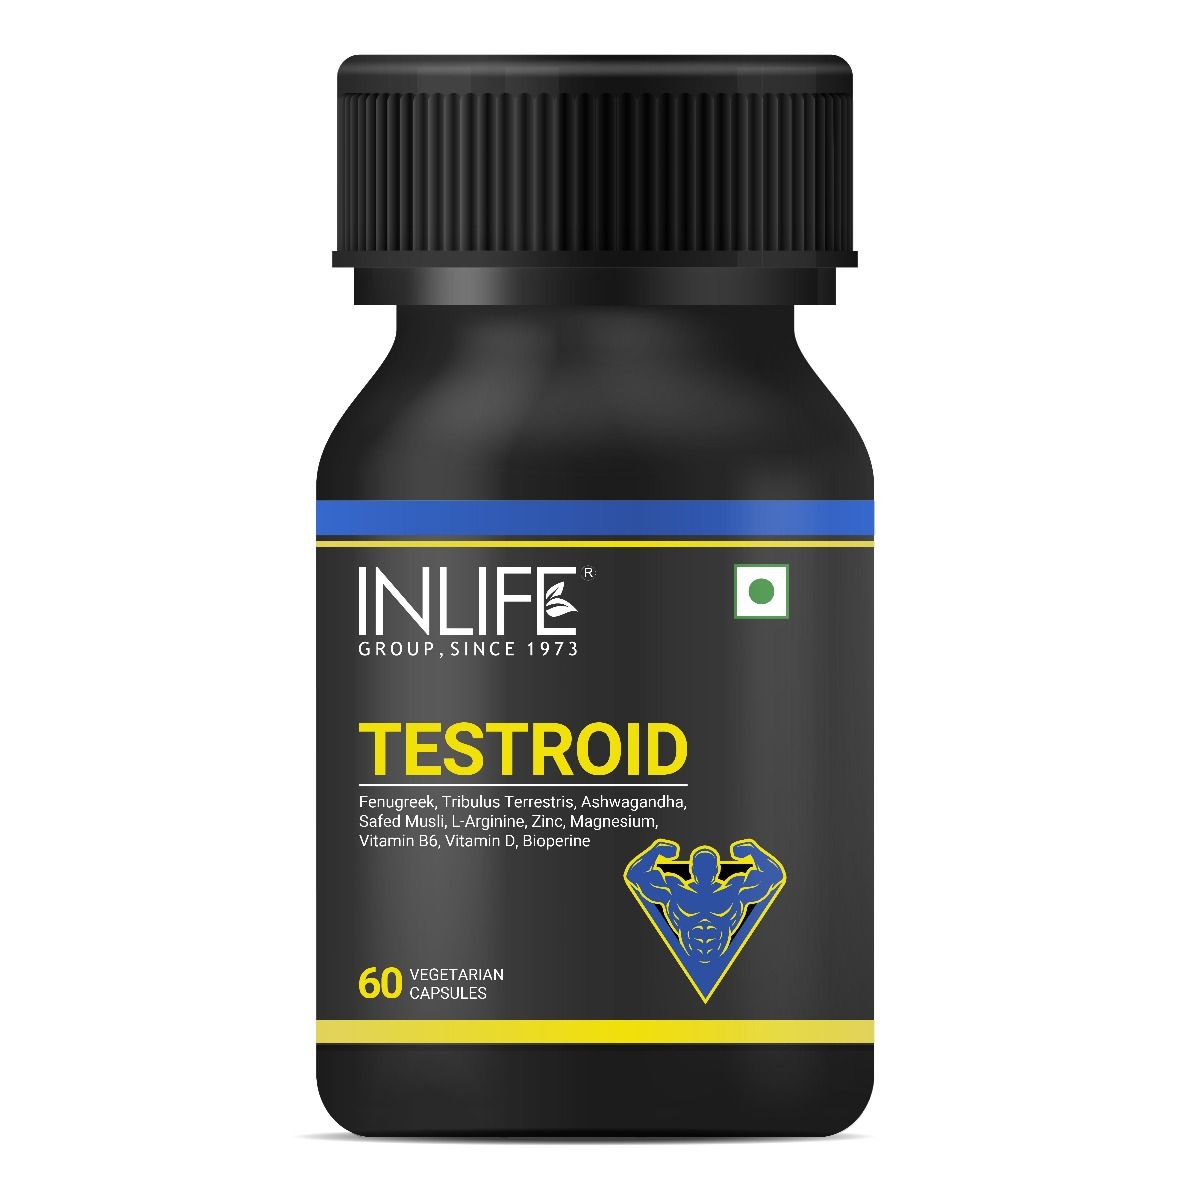 Inlife Testroid, 60 Capsules, Pack of 1 